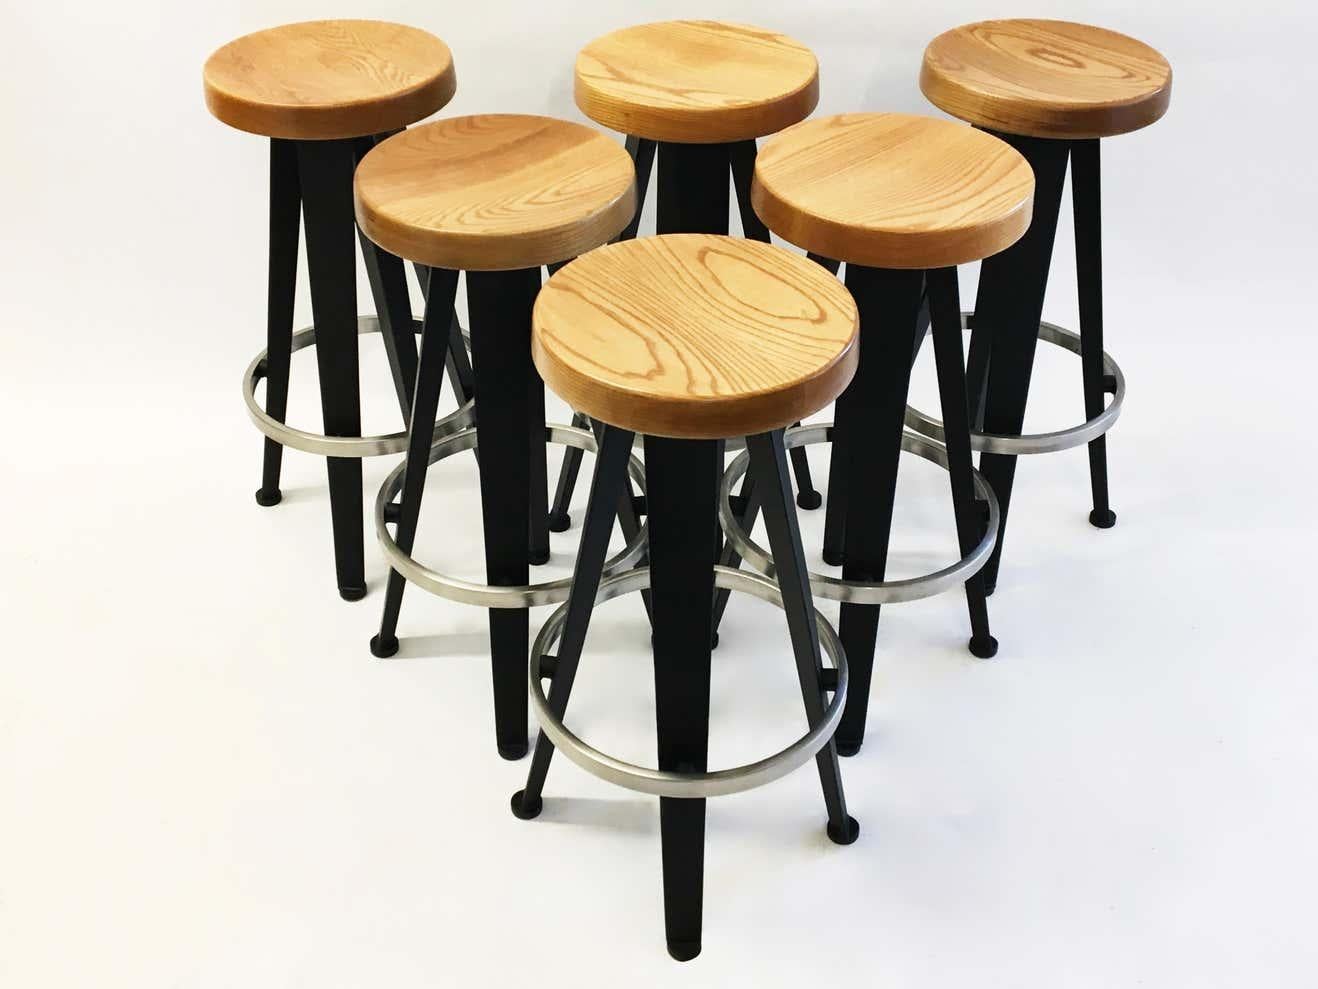 Six bar stools in black enameled metal, a brushed aluminum footrest, and a seat in hand-turned, stained oak with a slight concave in the center. They are an updated and improved version of Prouvé's 1952 design.
Diameter listed is the footrest's